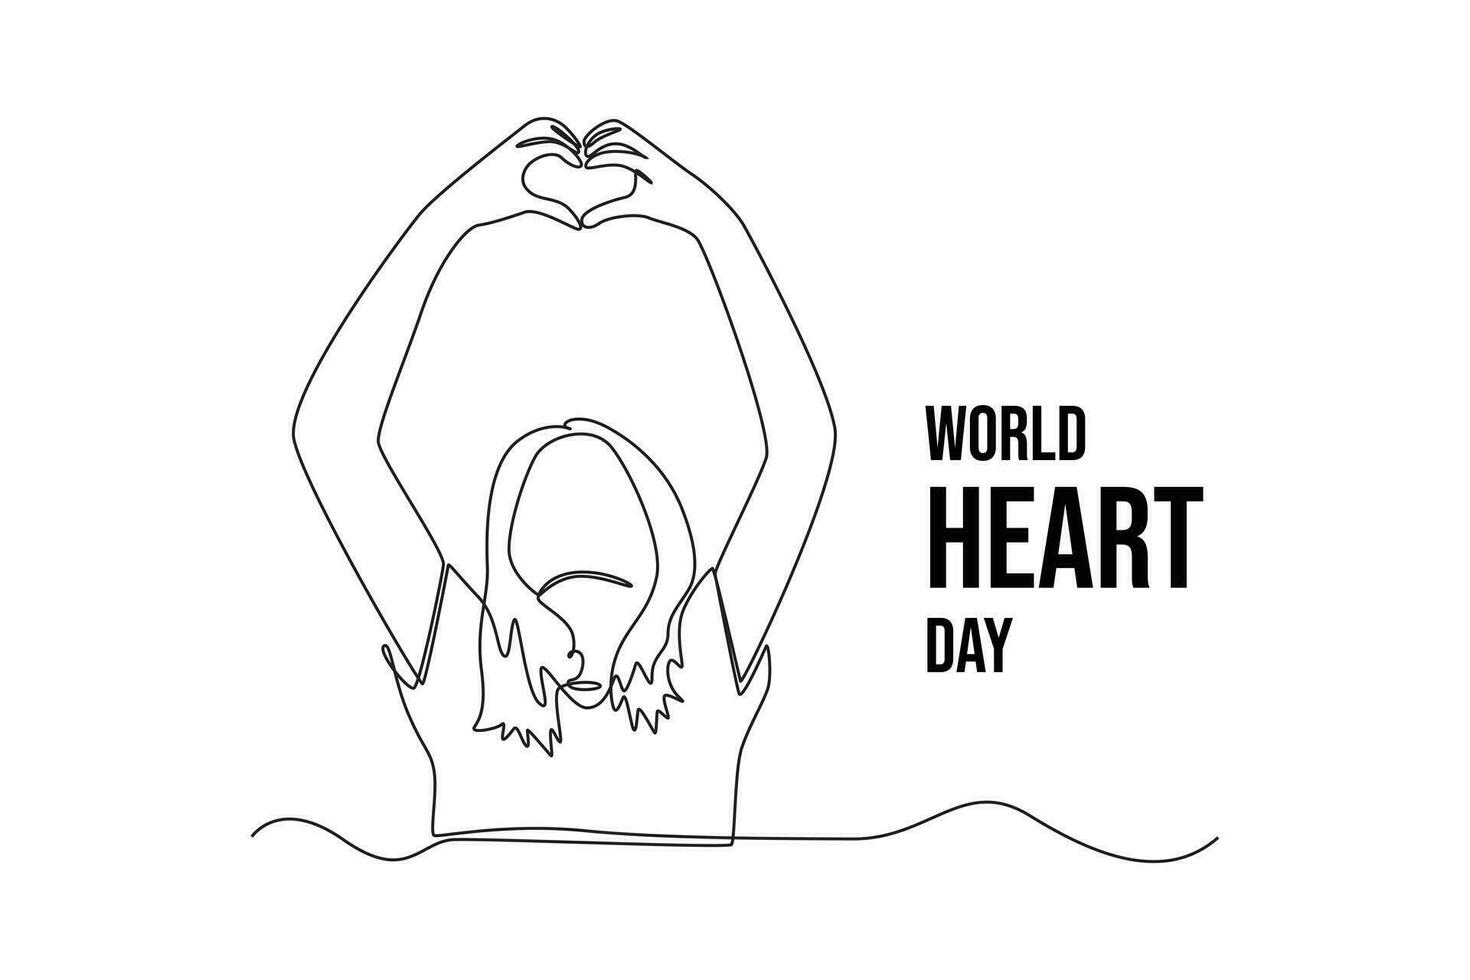 Continuous one line drawing World Heart Day concept. Single line draw design vector graphic illustration.